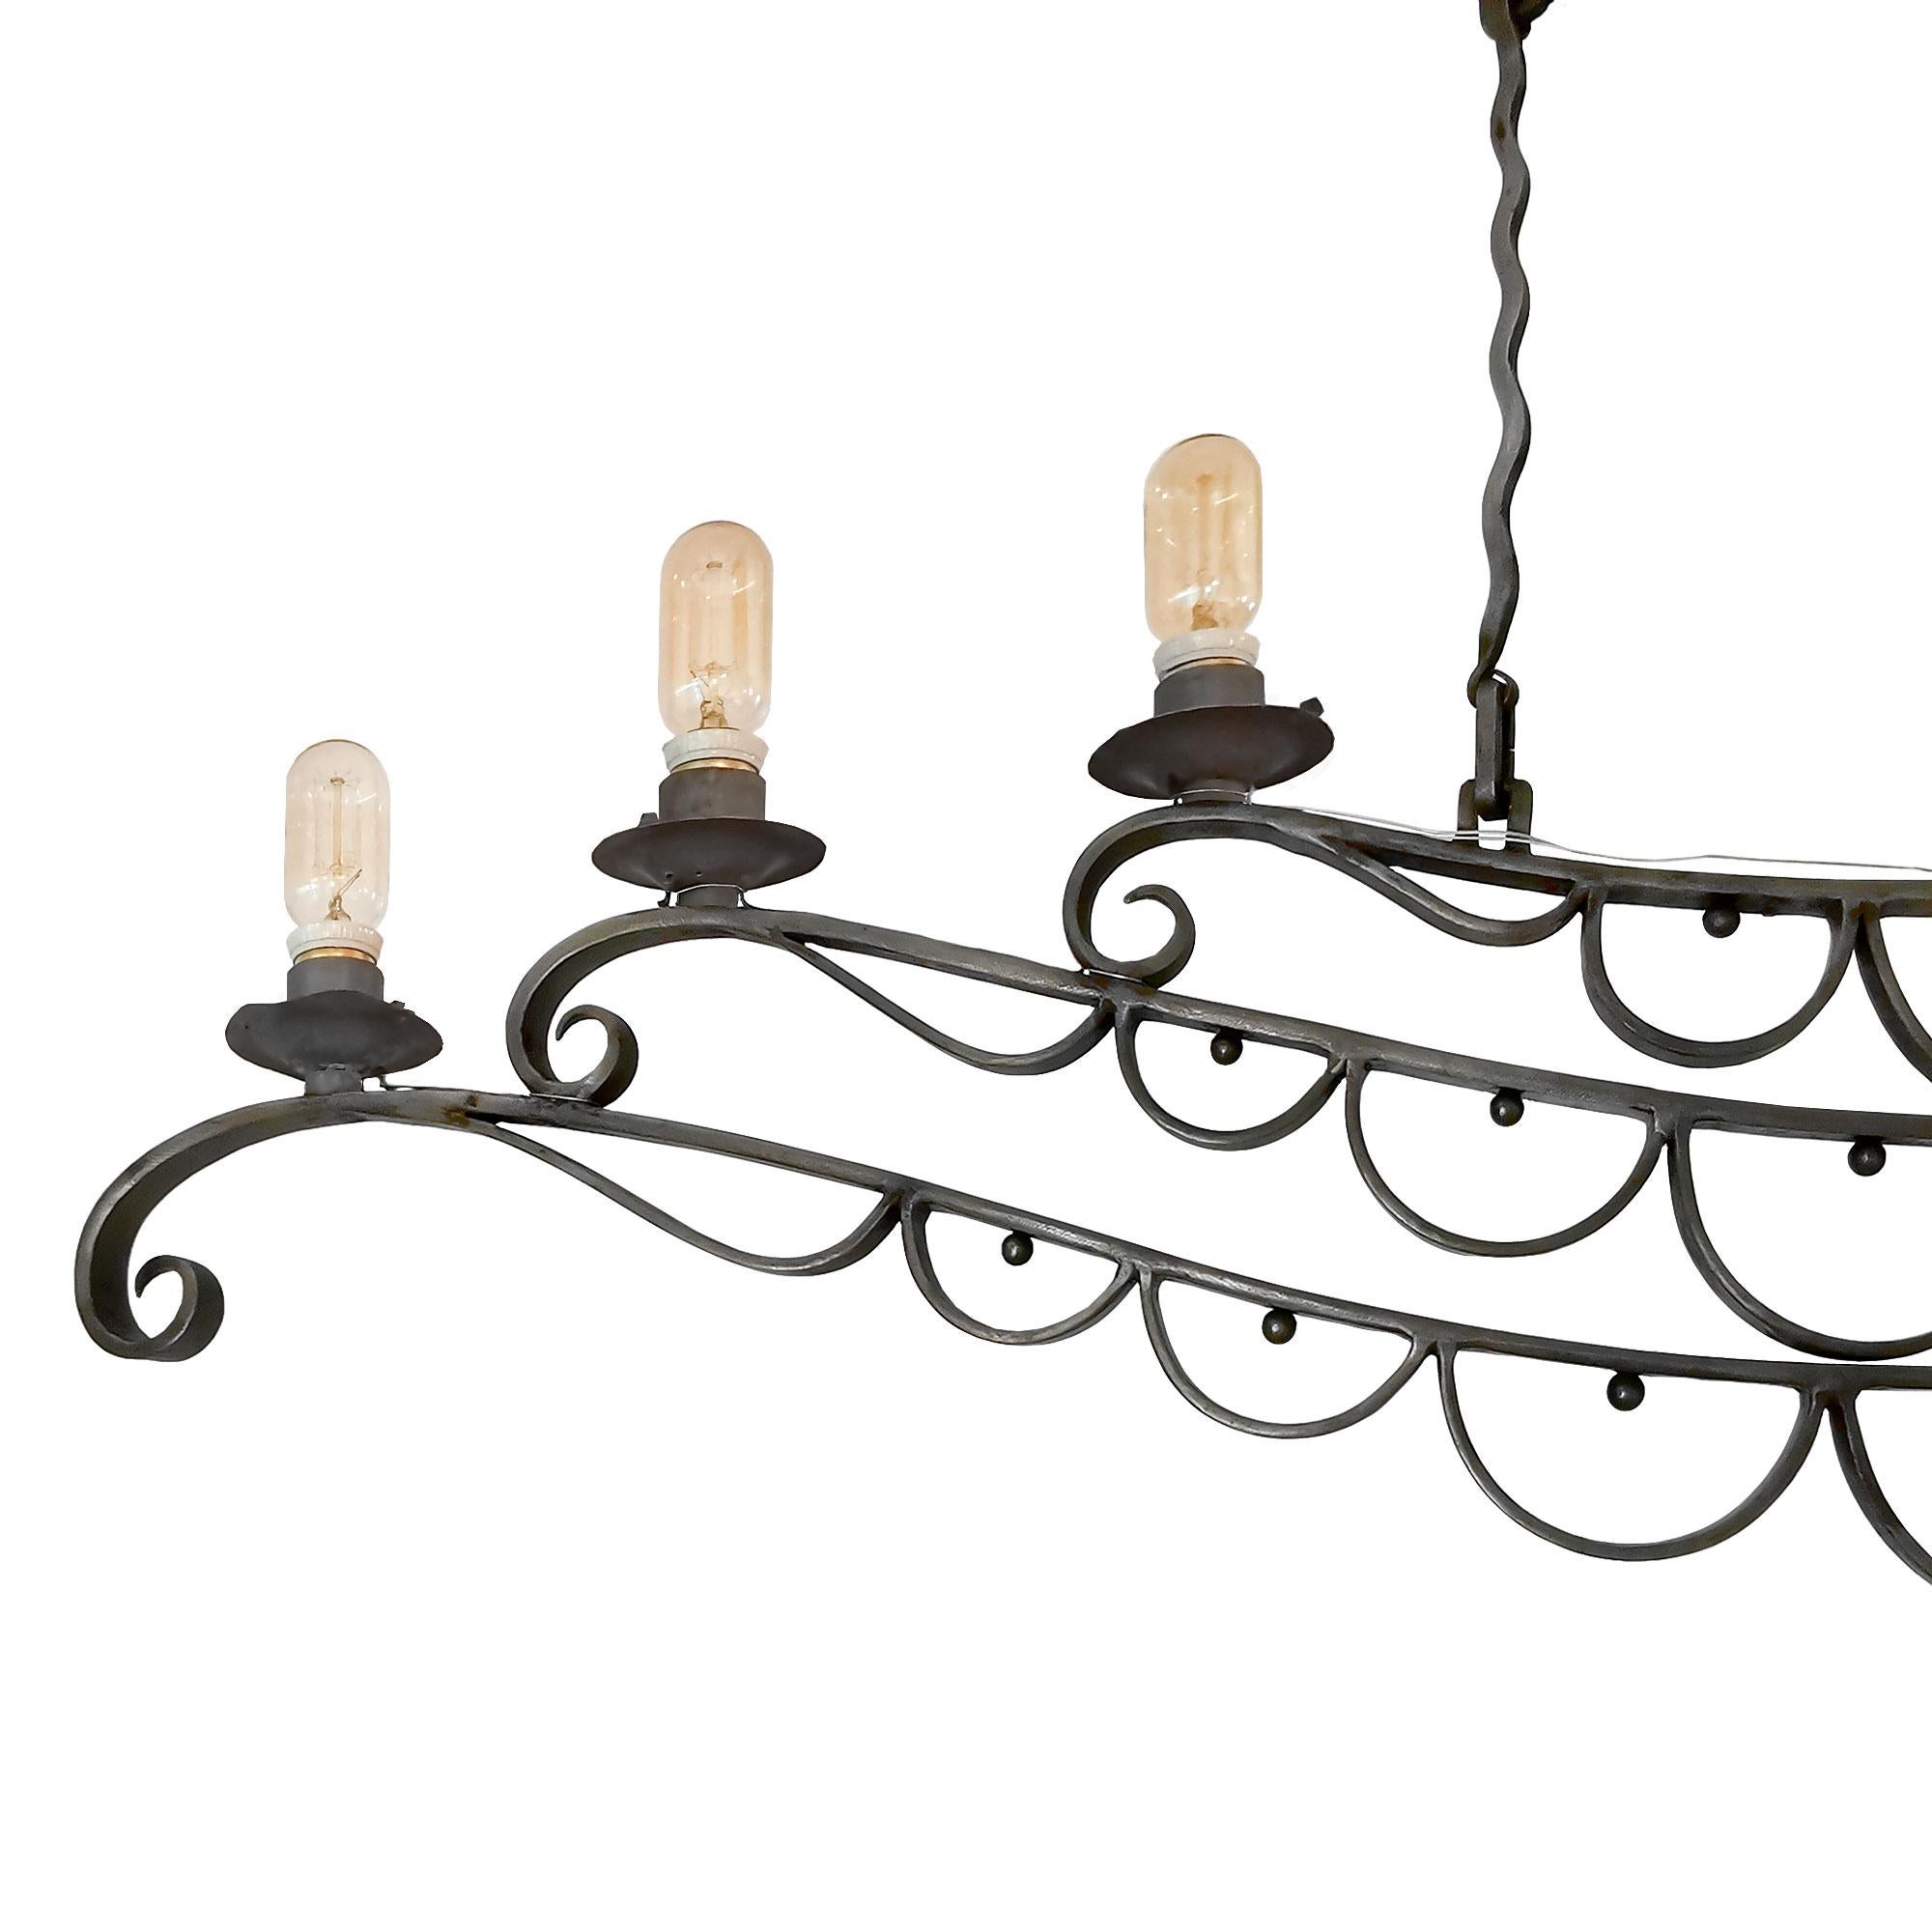 Art Nouveau 1890-1900 Large Ceiling Light in Wrought Iron, Oil Lamp, Electrified, France